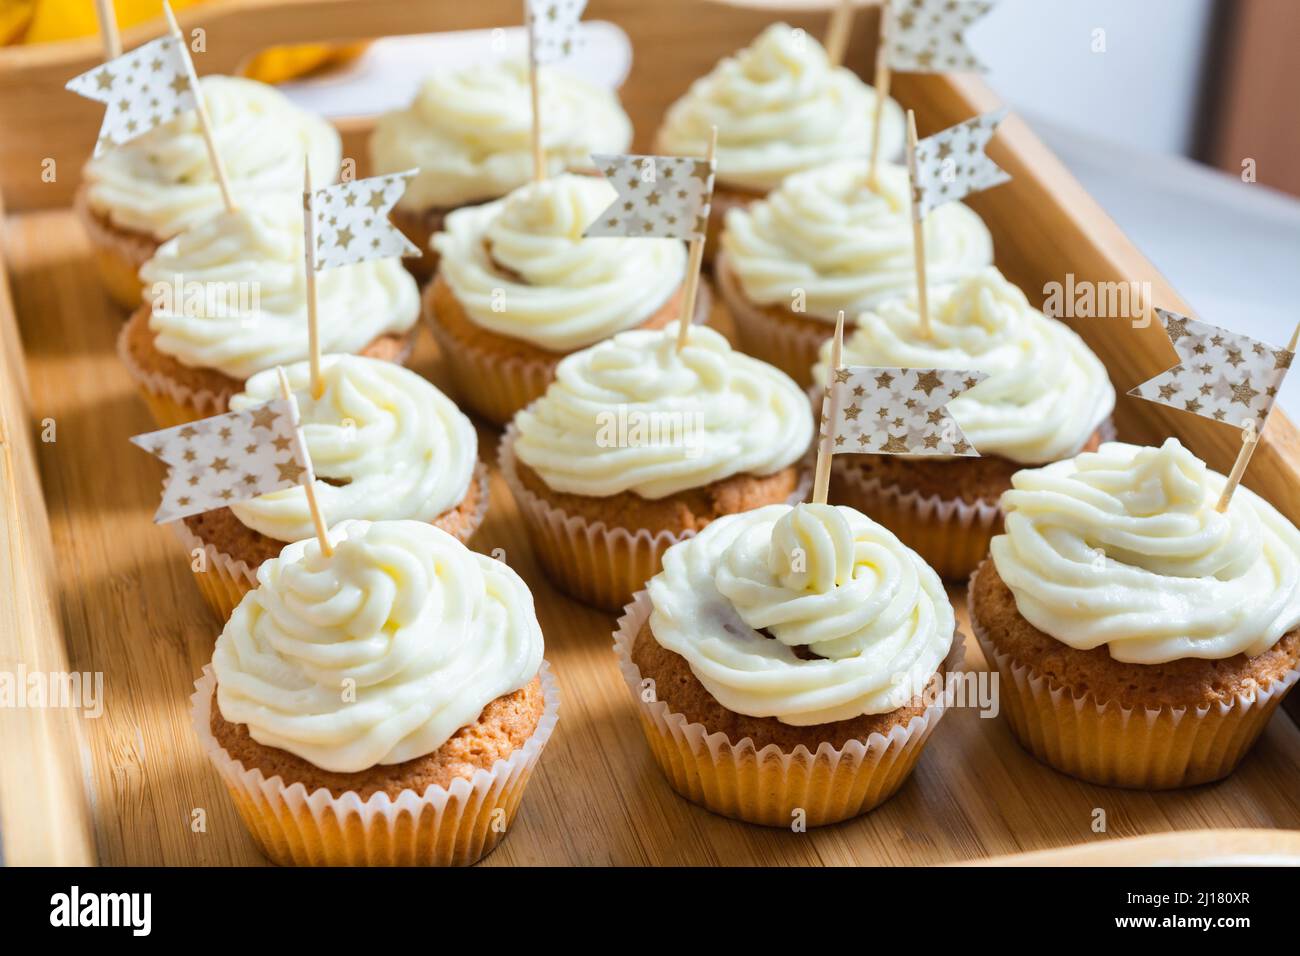 Tasty cupcakes with cream on wooden tray on holiday table with flags Stock Photo